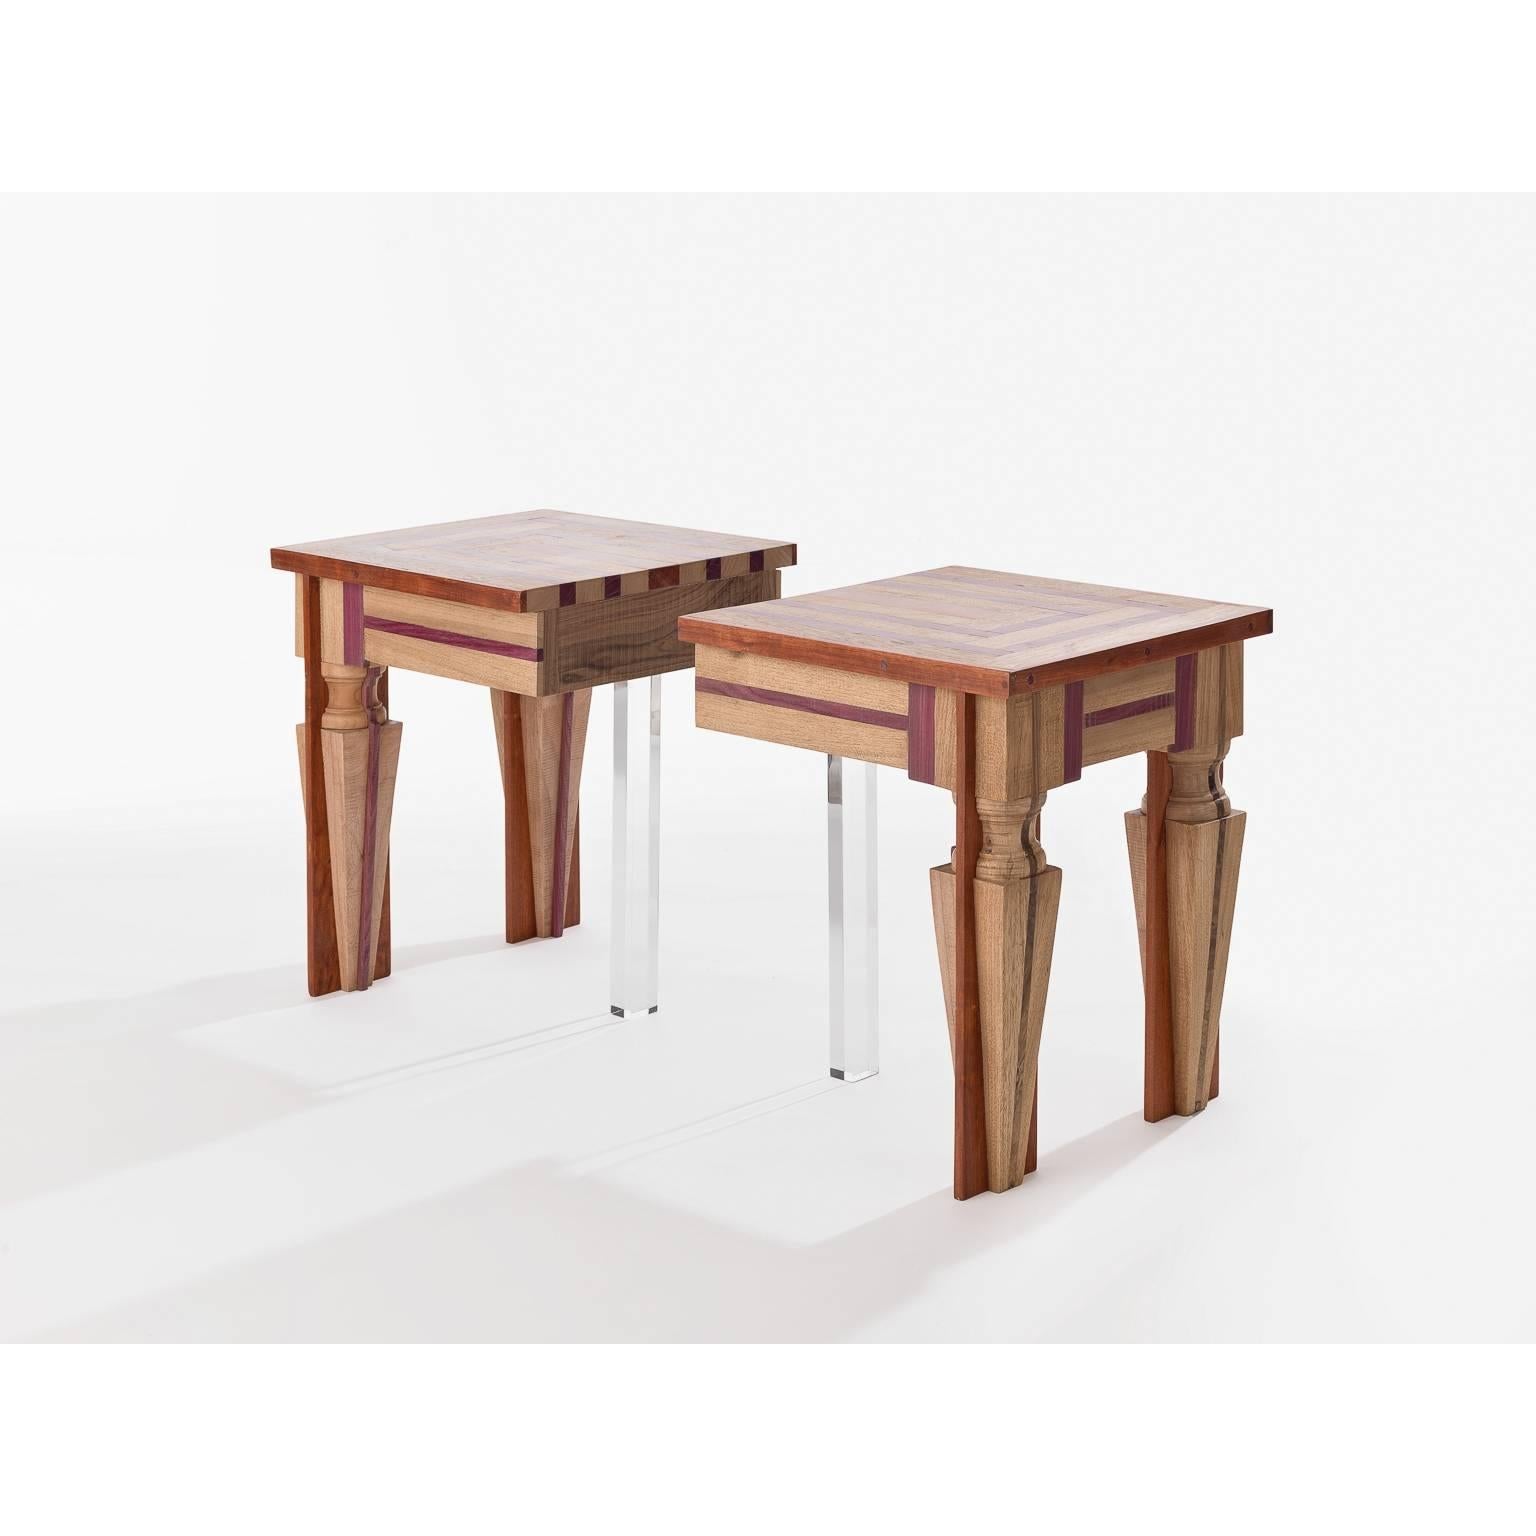 This contemporary set of side tables is made of handcrafted Amazonian woods (Freijo, Muirapiranga), handcrafted Italian nut and acrylic.

This piece is the result of artisanal production process, which makes it extremely unique. Therefore, any